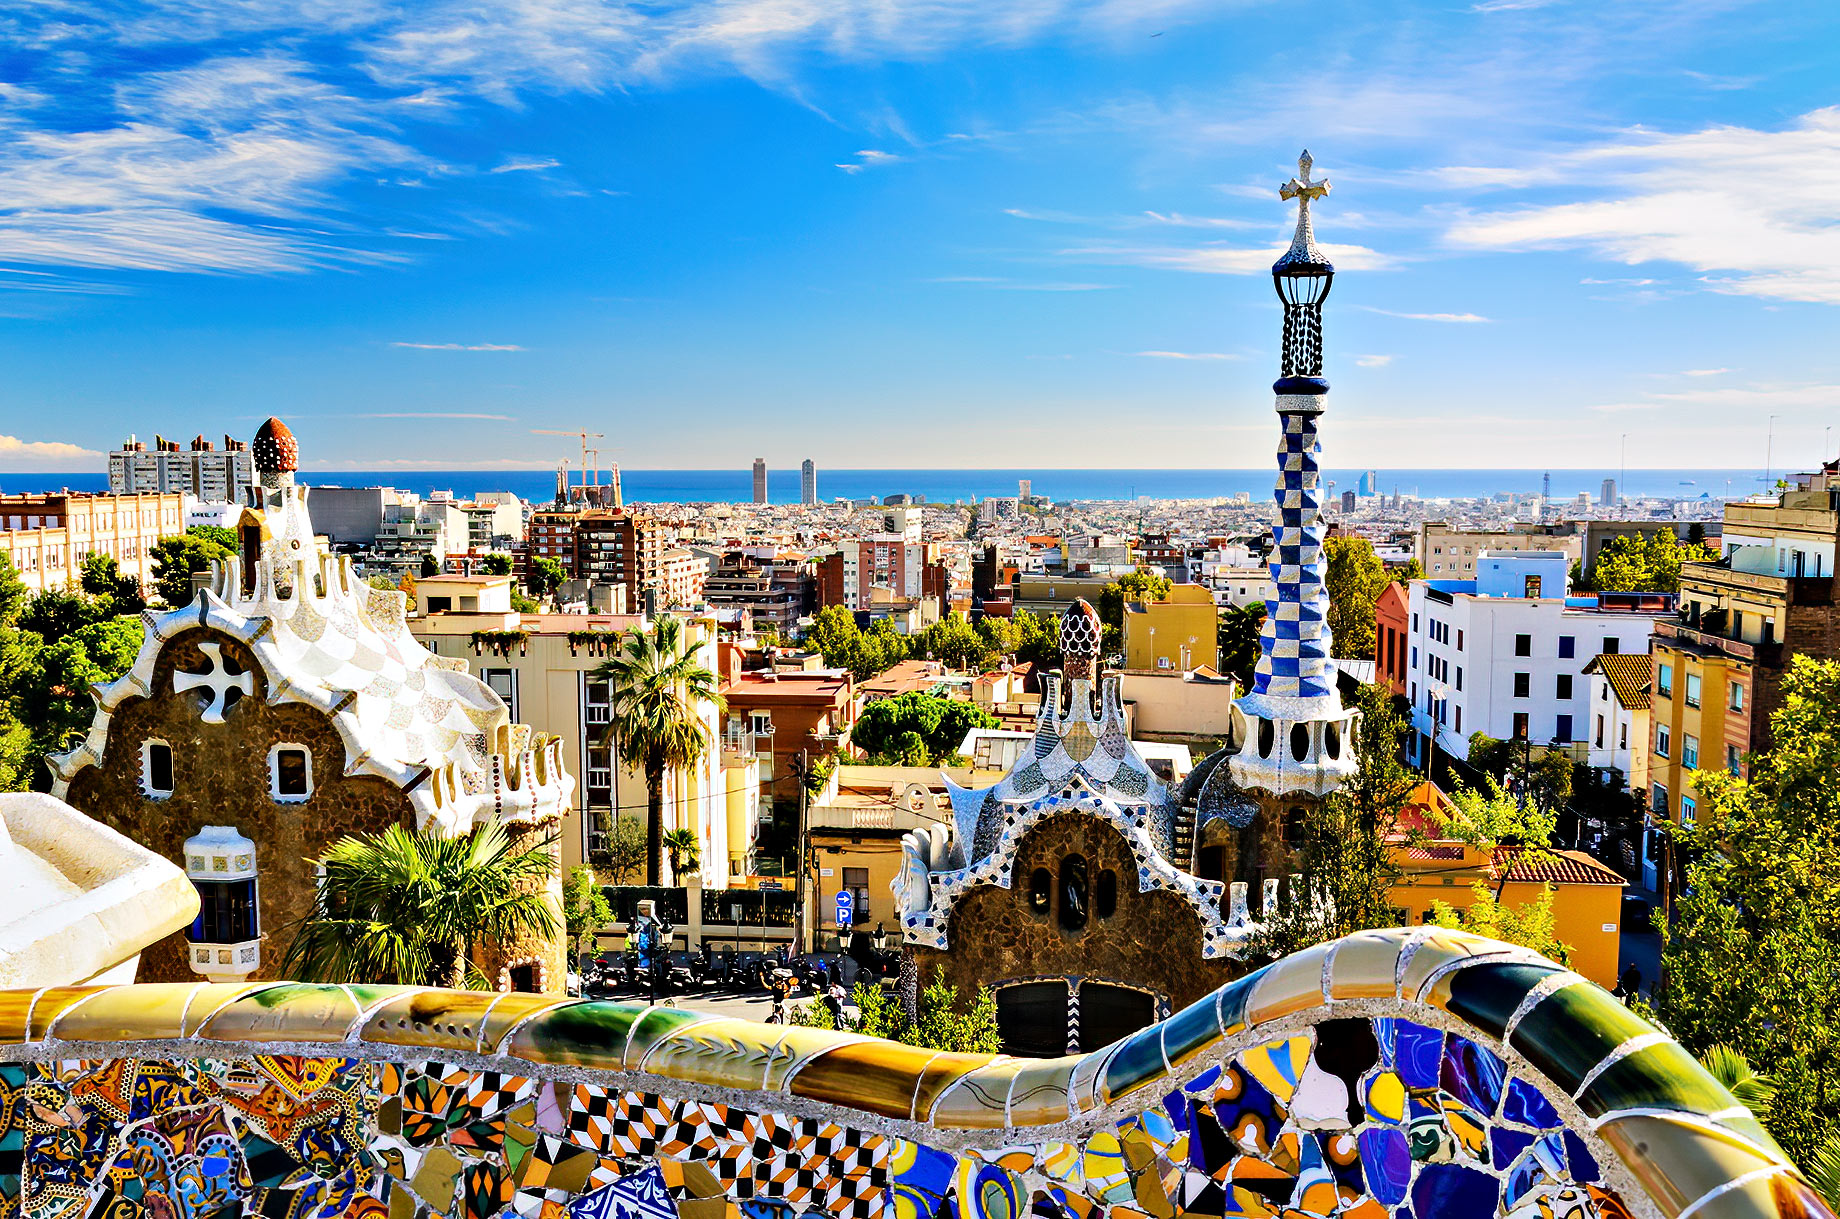 Barcelona, Spain: A Symphony of Art, History, and Architecture